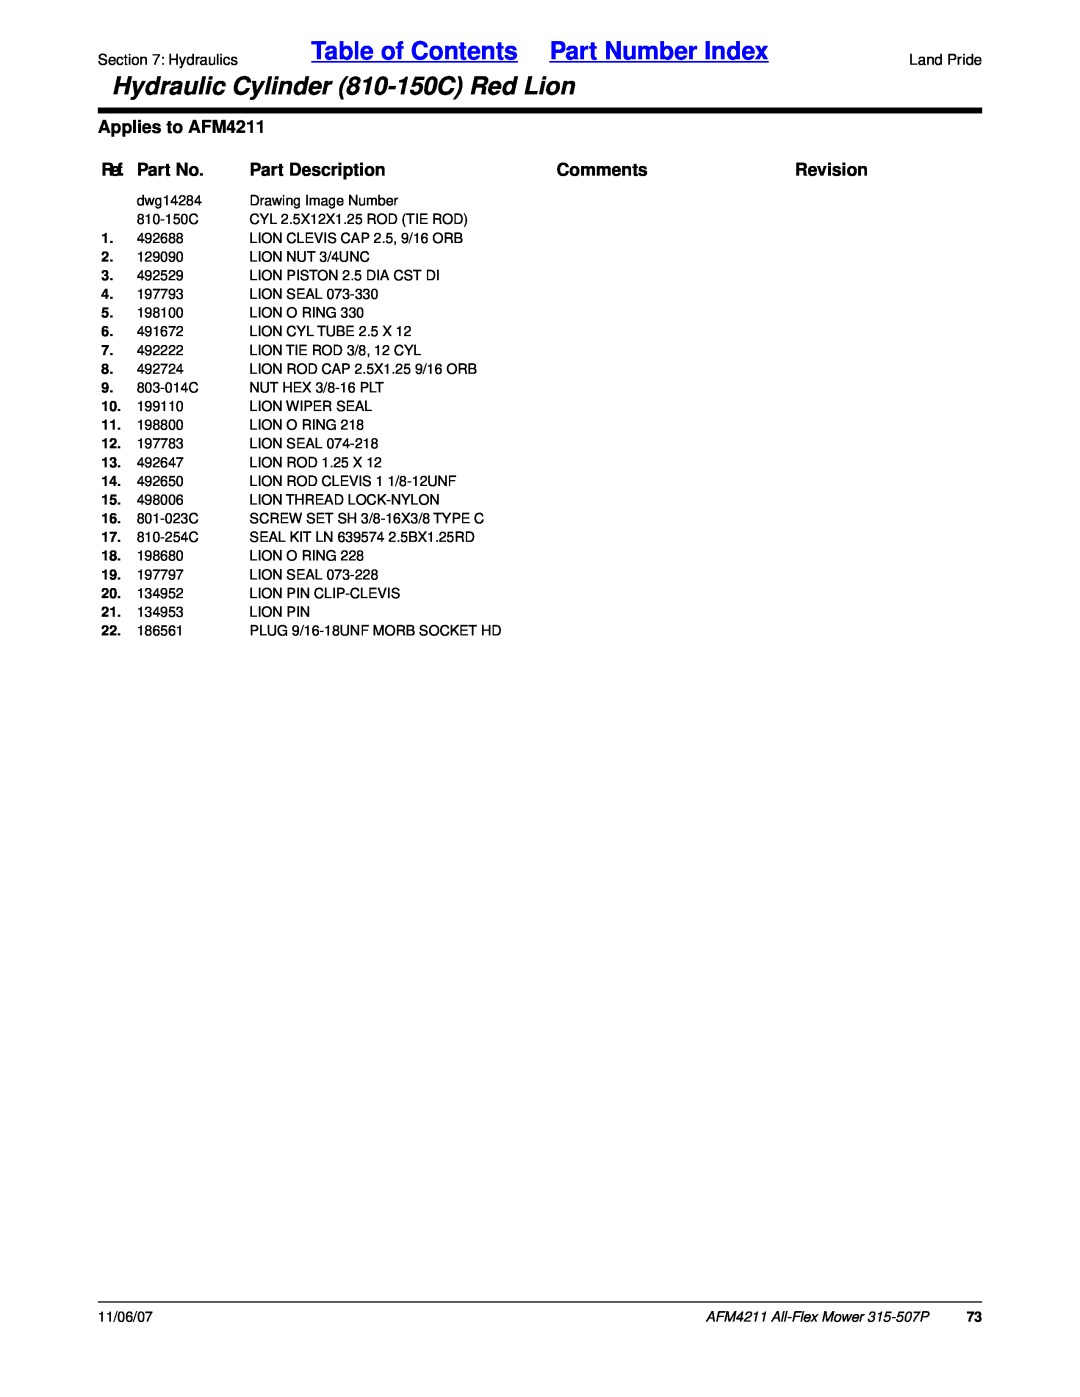 Land Pride Table of Contents Part Number Index, Hydraulic Cylinder 810-150CRed Lion, Applies to AFM4211, Ref. Part No 